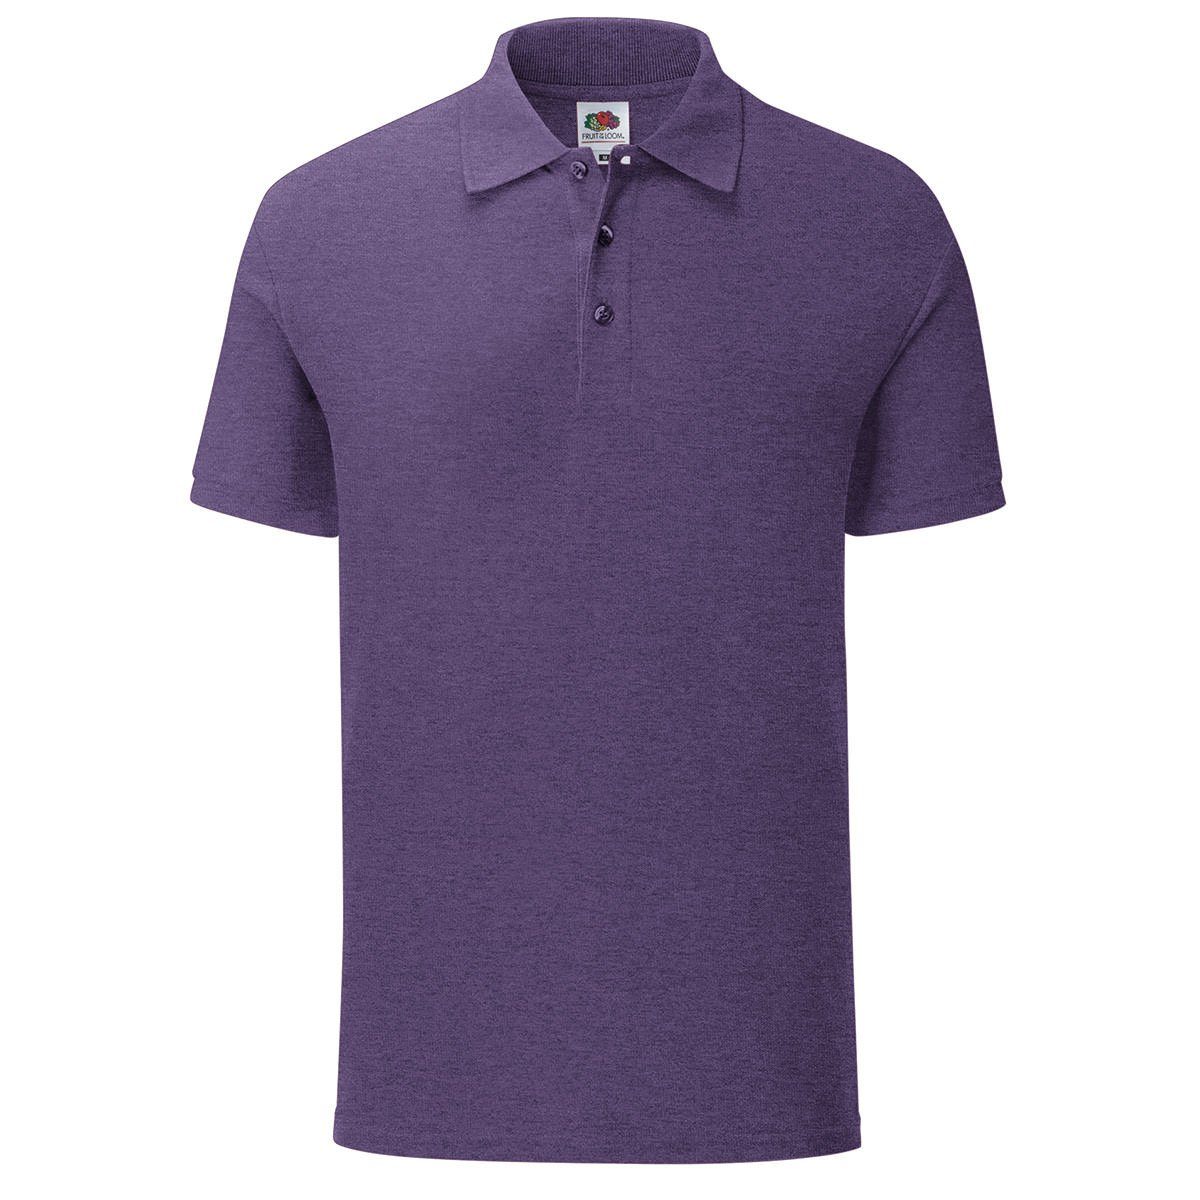 Fruit of the Loom Poloshirt Fruit of the Loom Iconic Polo violett meliert